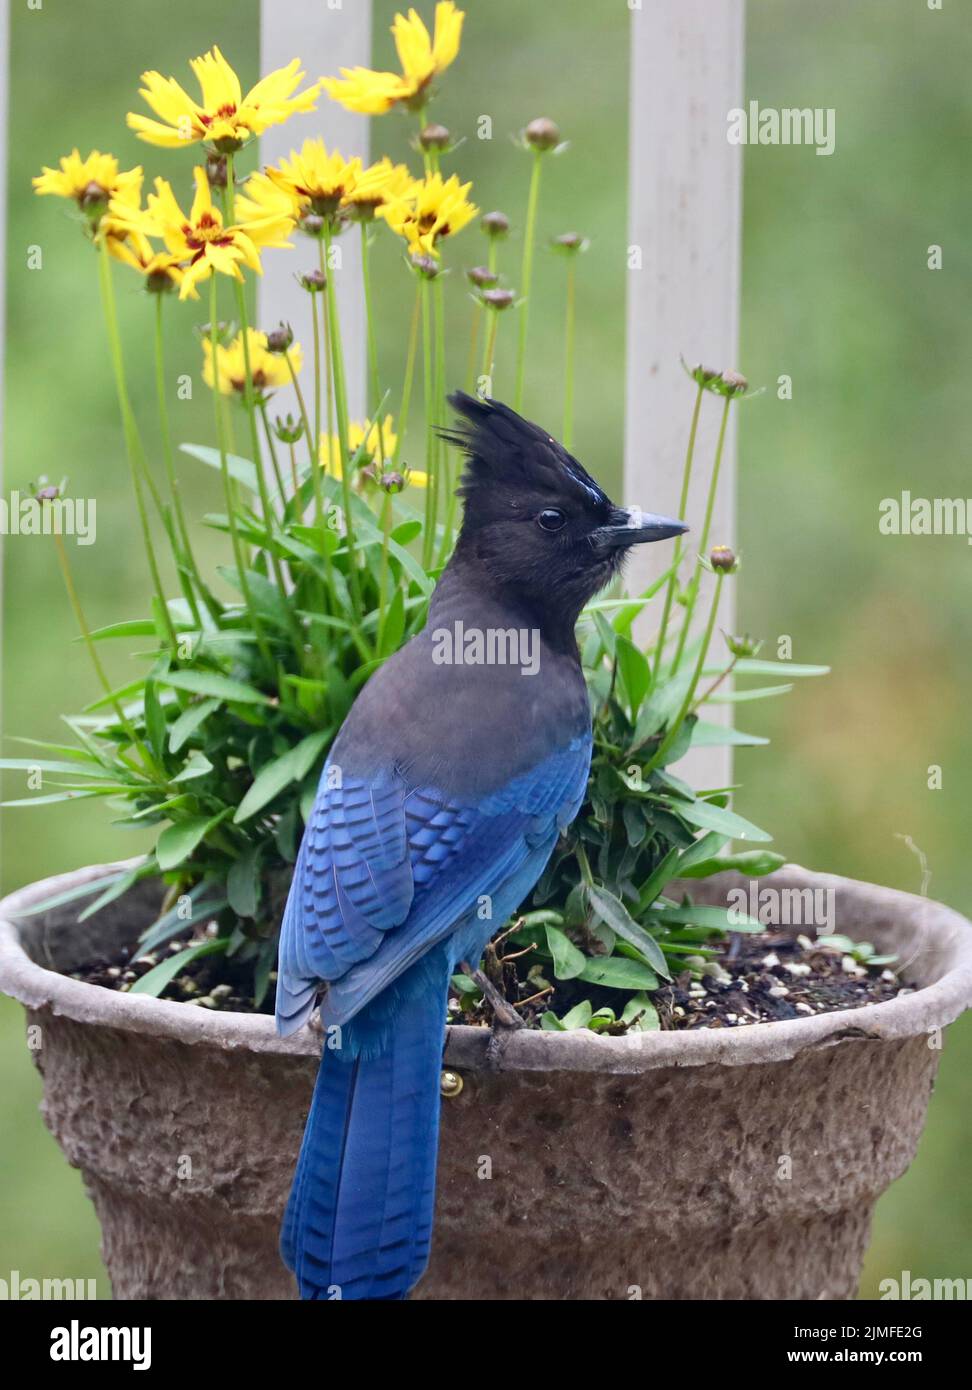 A vertical closeup shot of a blue steller's jay perched on a potted plant Stock Photo